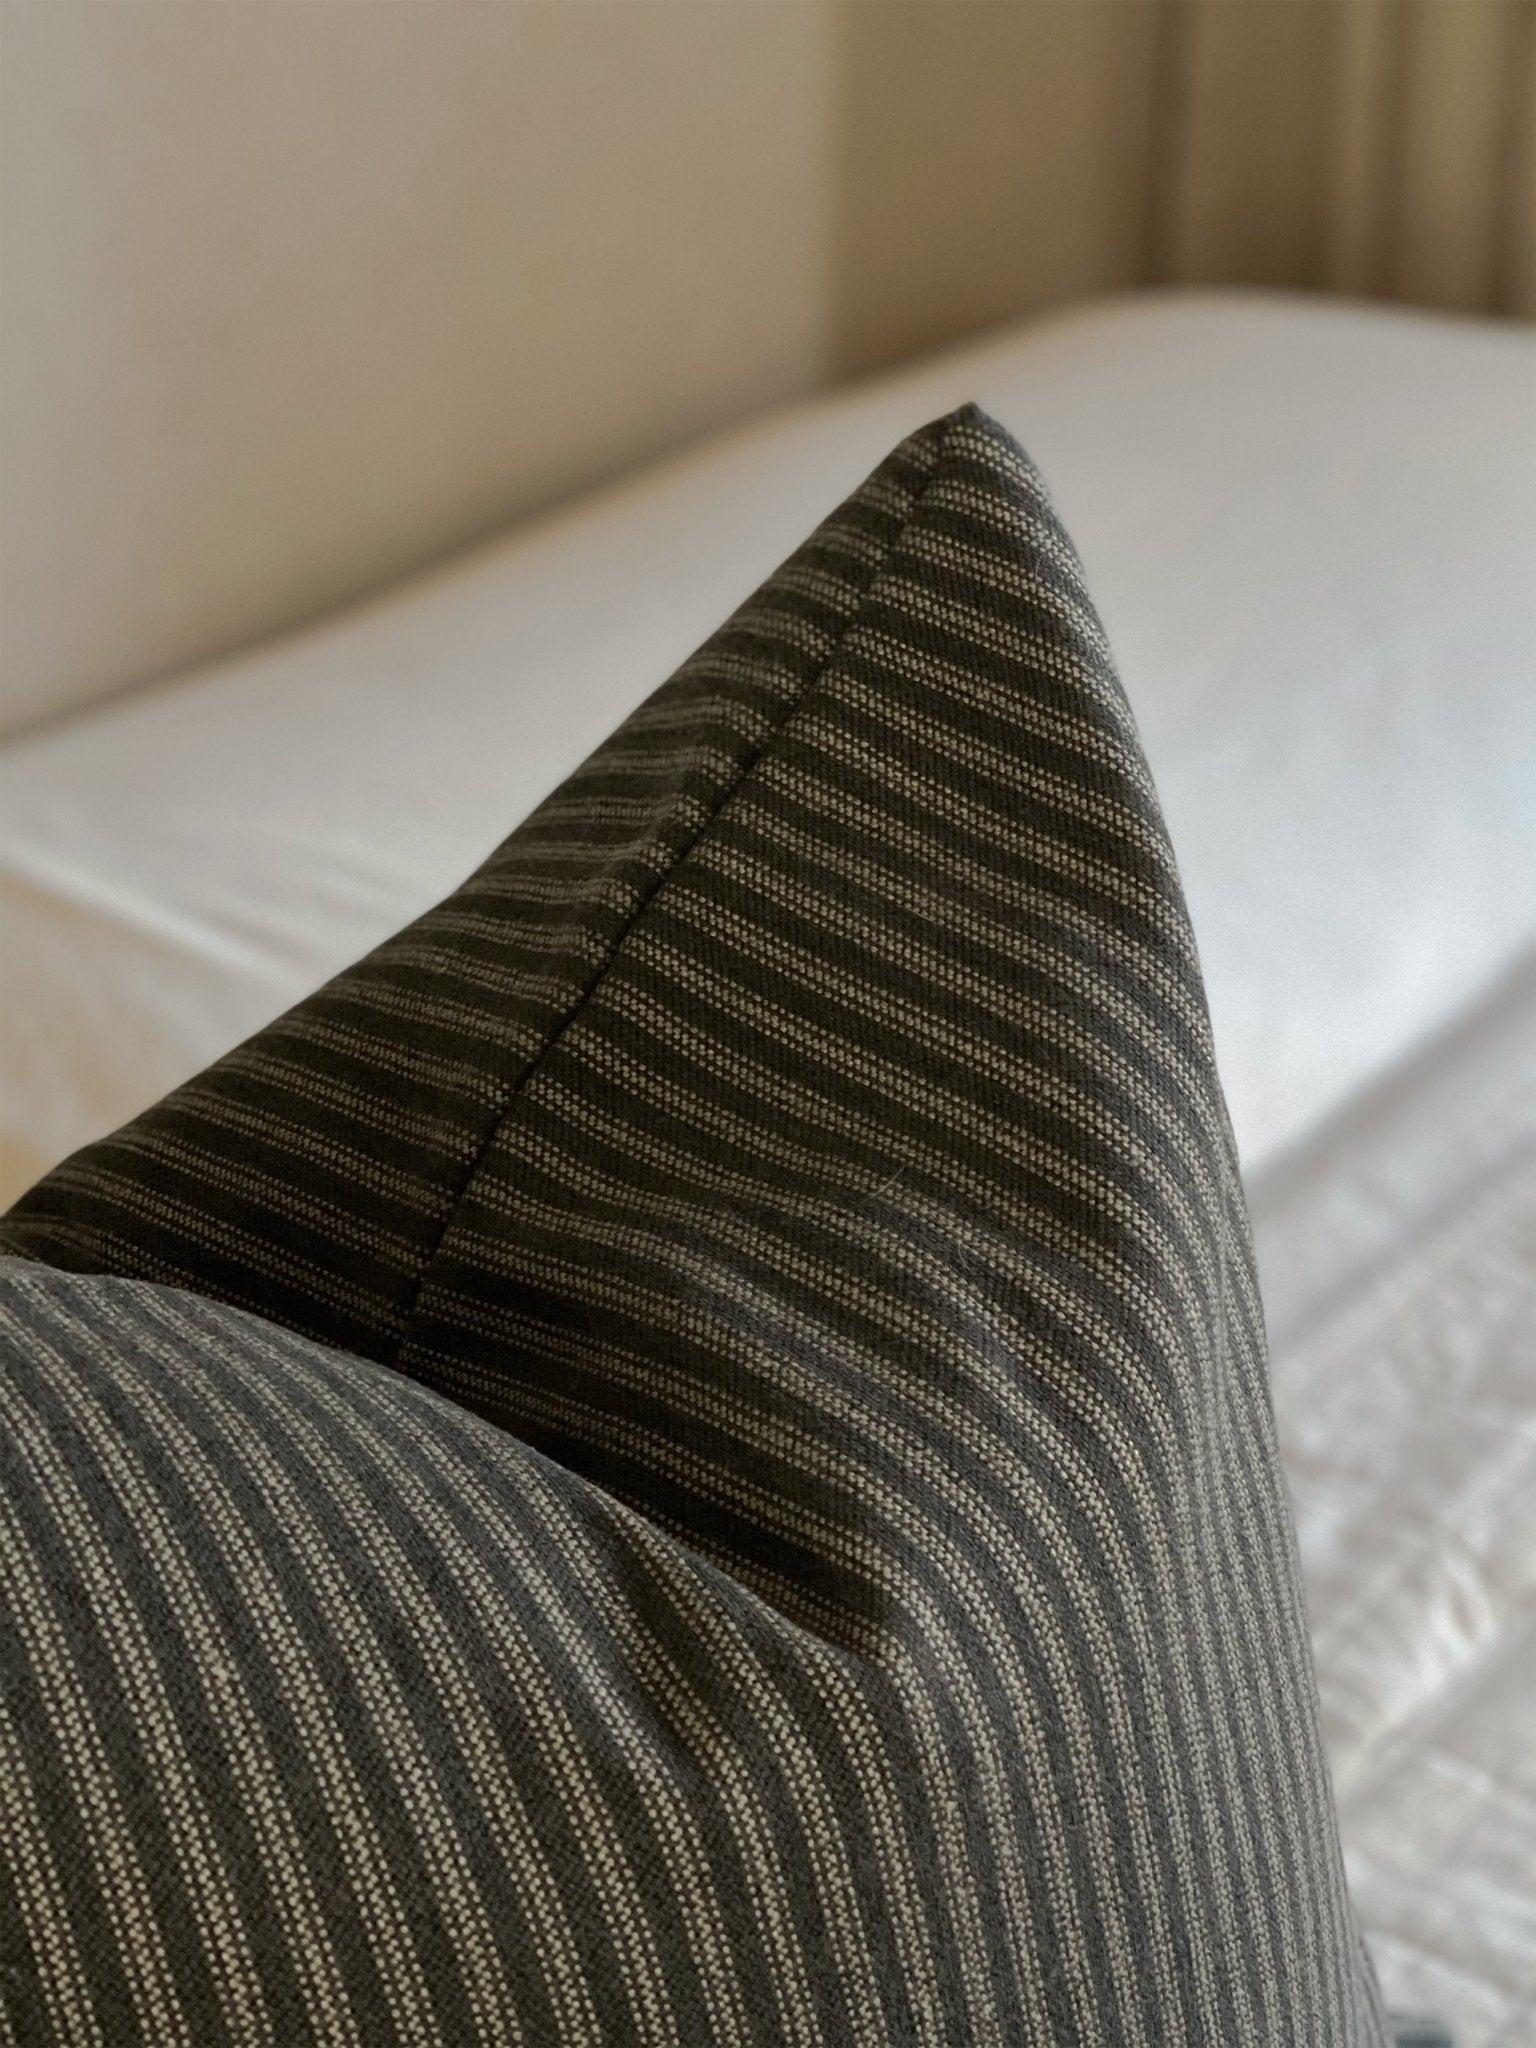 A close-up view of the black ticking striped throw pillow on neutral bedding